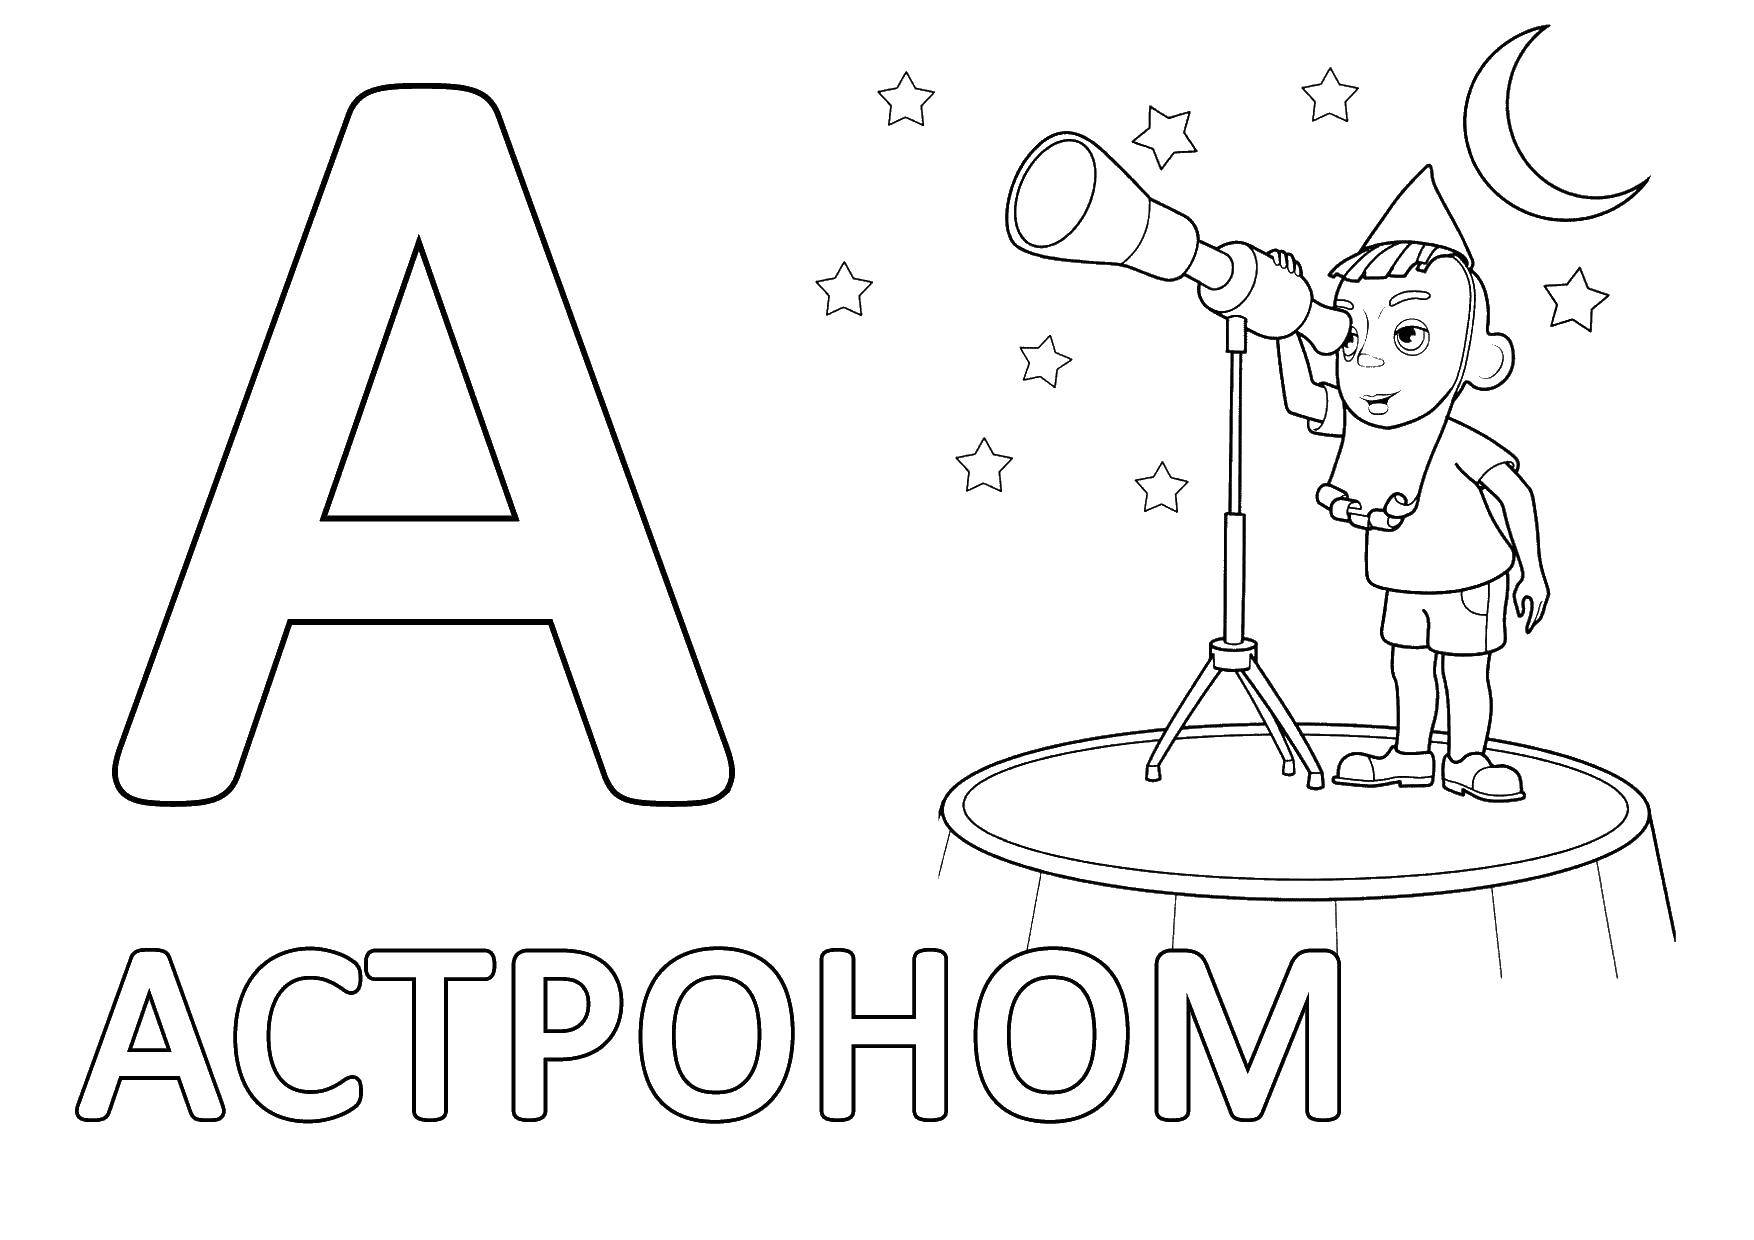 Coloring Astronomer. Category letters. Tags:  astronomer, letters.